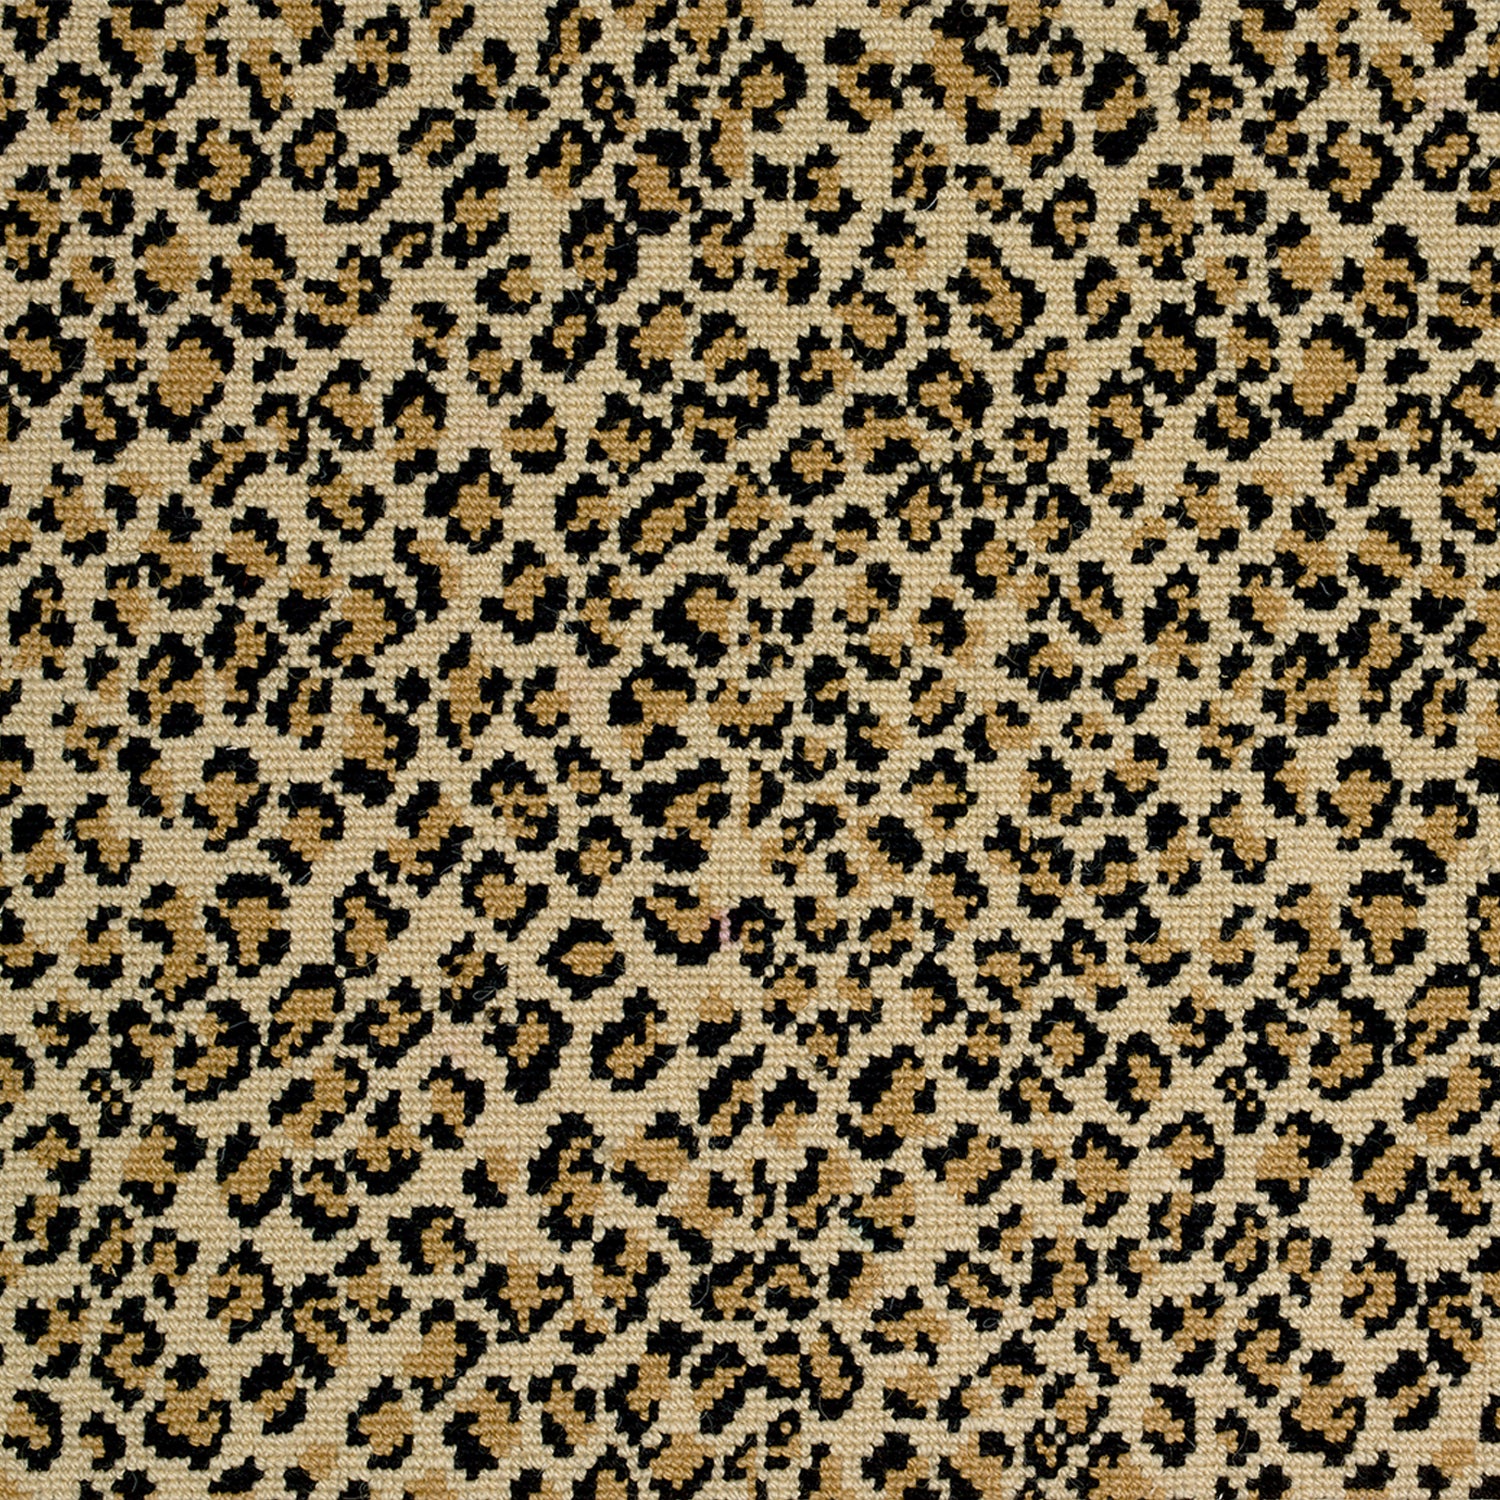 Wool-blend broadloom carpet swatch in a small scale animal print pattern in black and gold on a tan field.